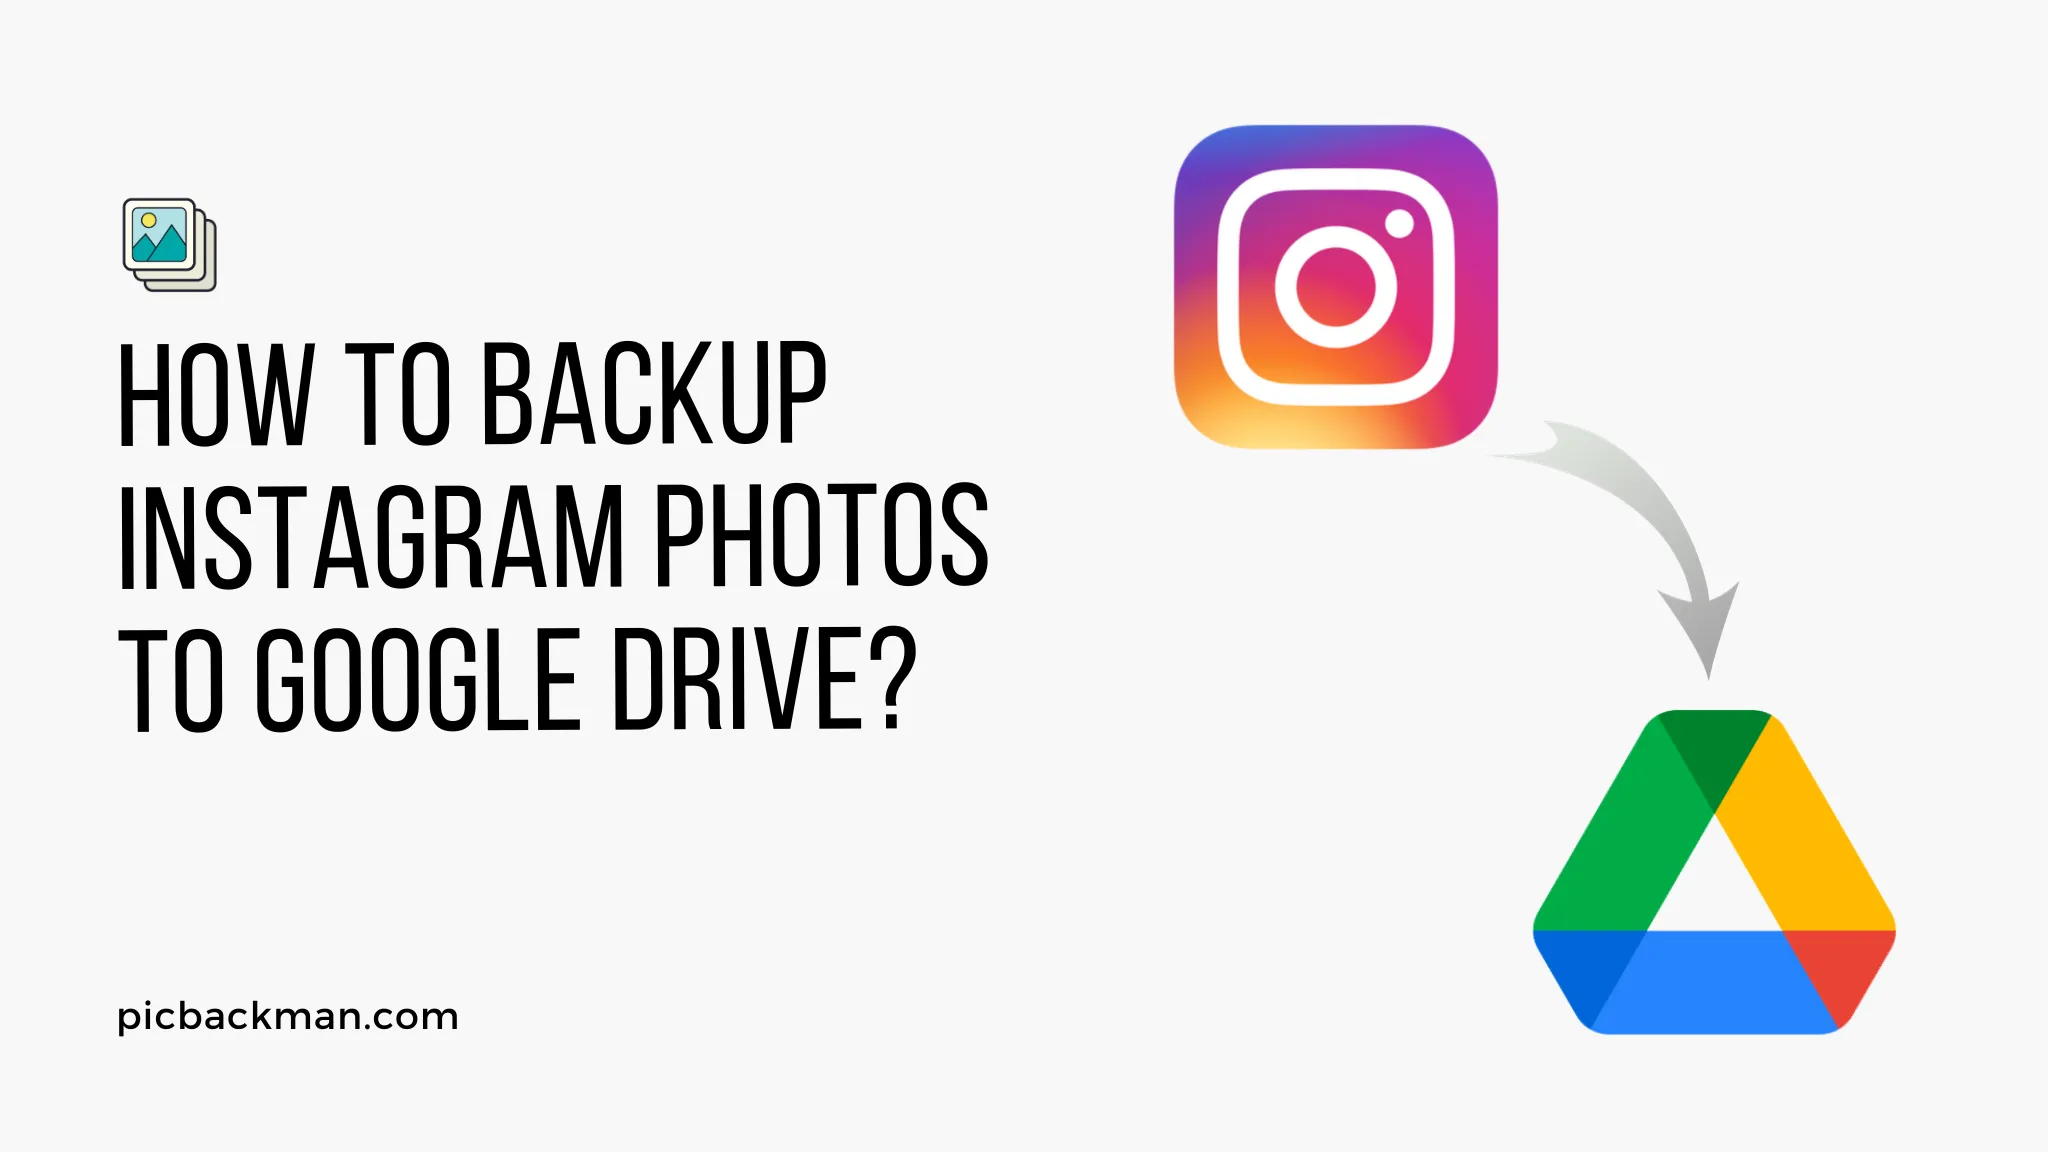 How to backup Instagram photos to Google Drive?